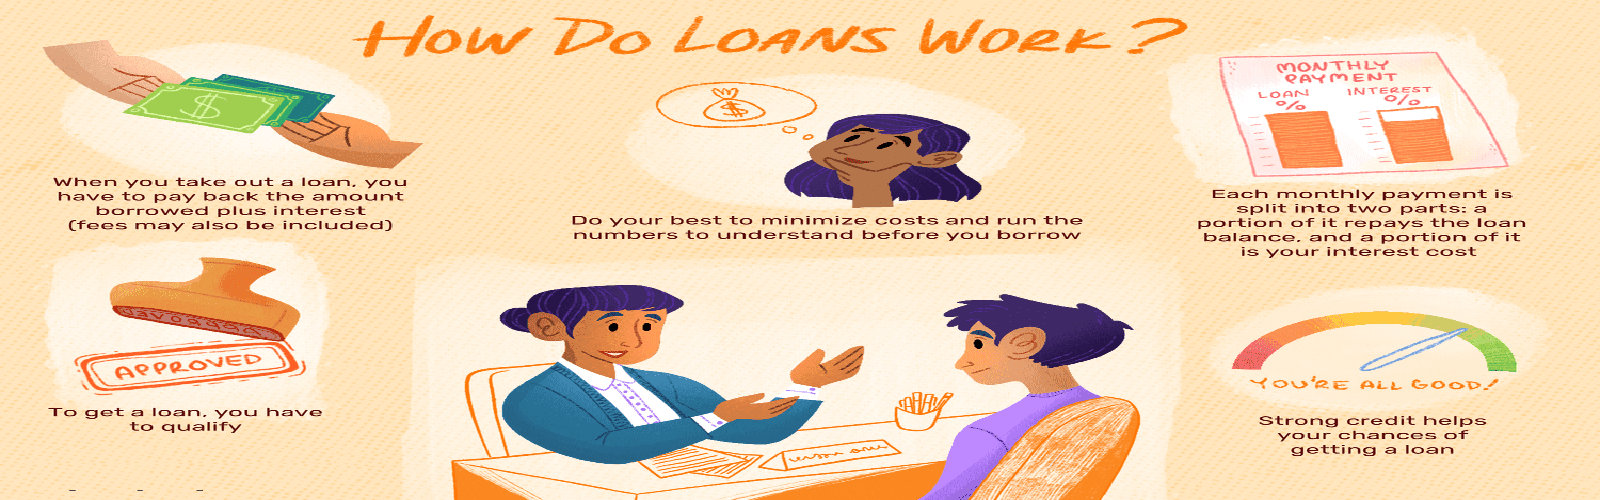 Online loan approval in just 5 minutes